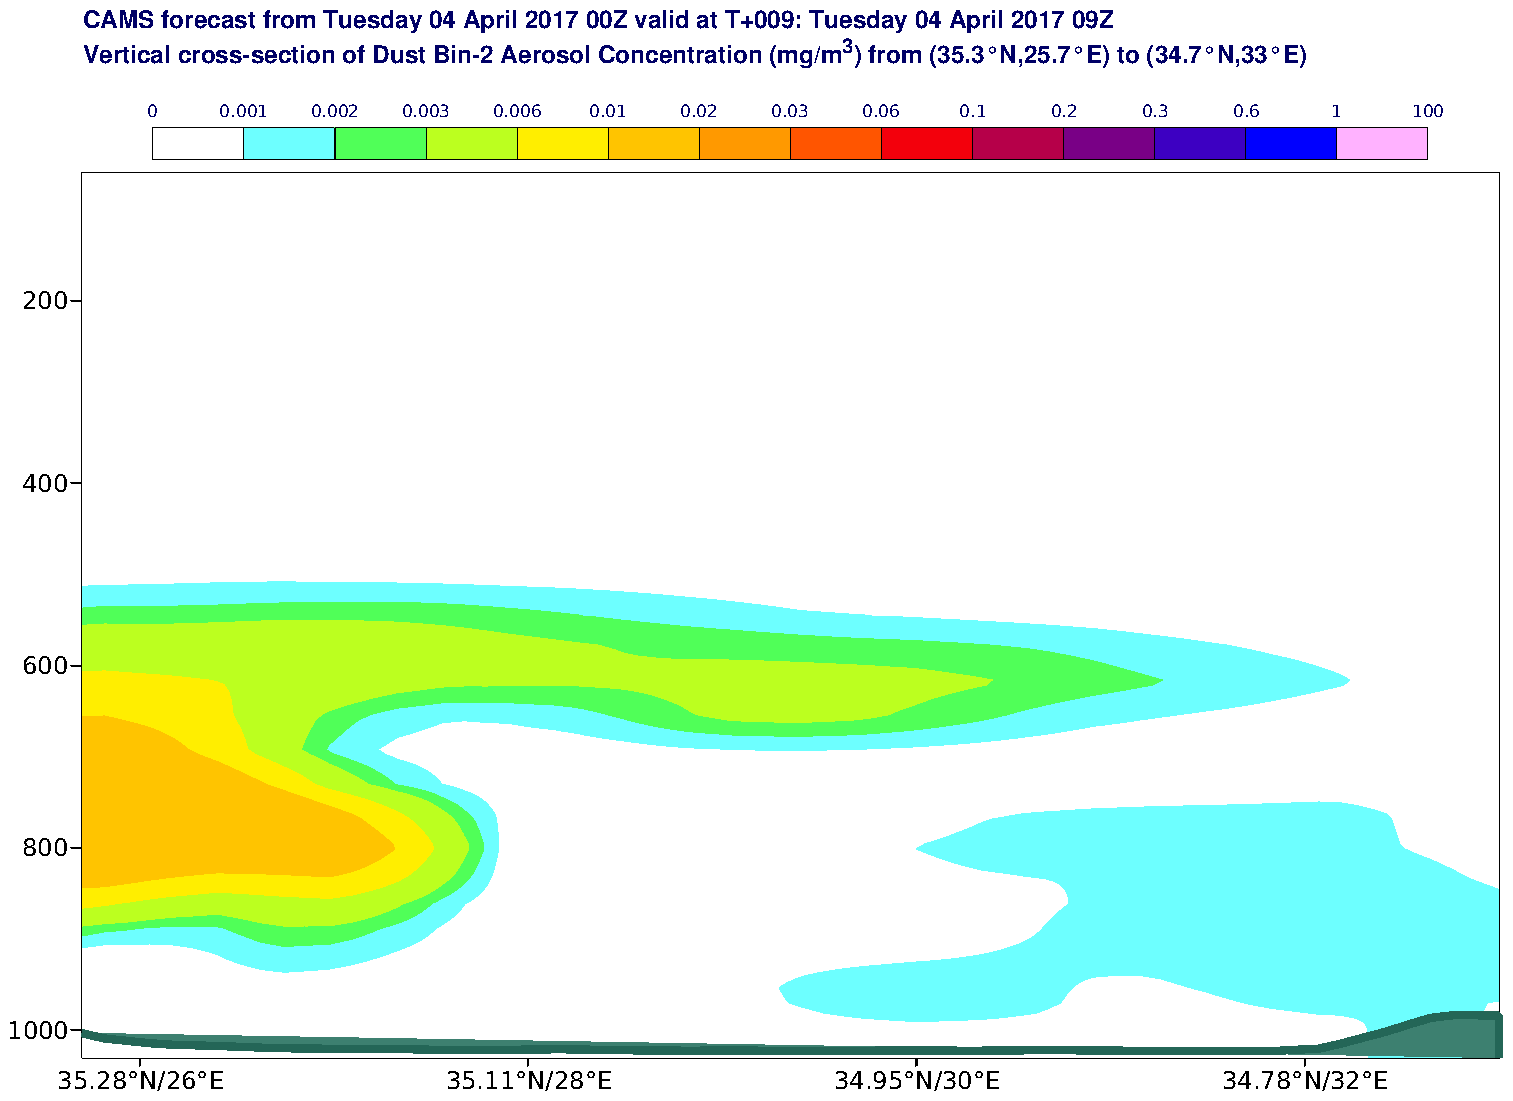 Vertical cross-section of Dust Bin-2 Aerosol Concentration (mg/m3) valid at T9 - 2017-04-04 09:00